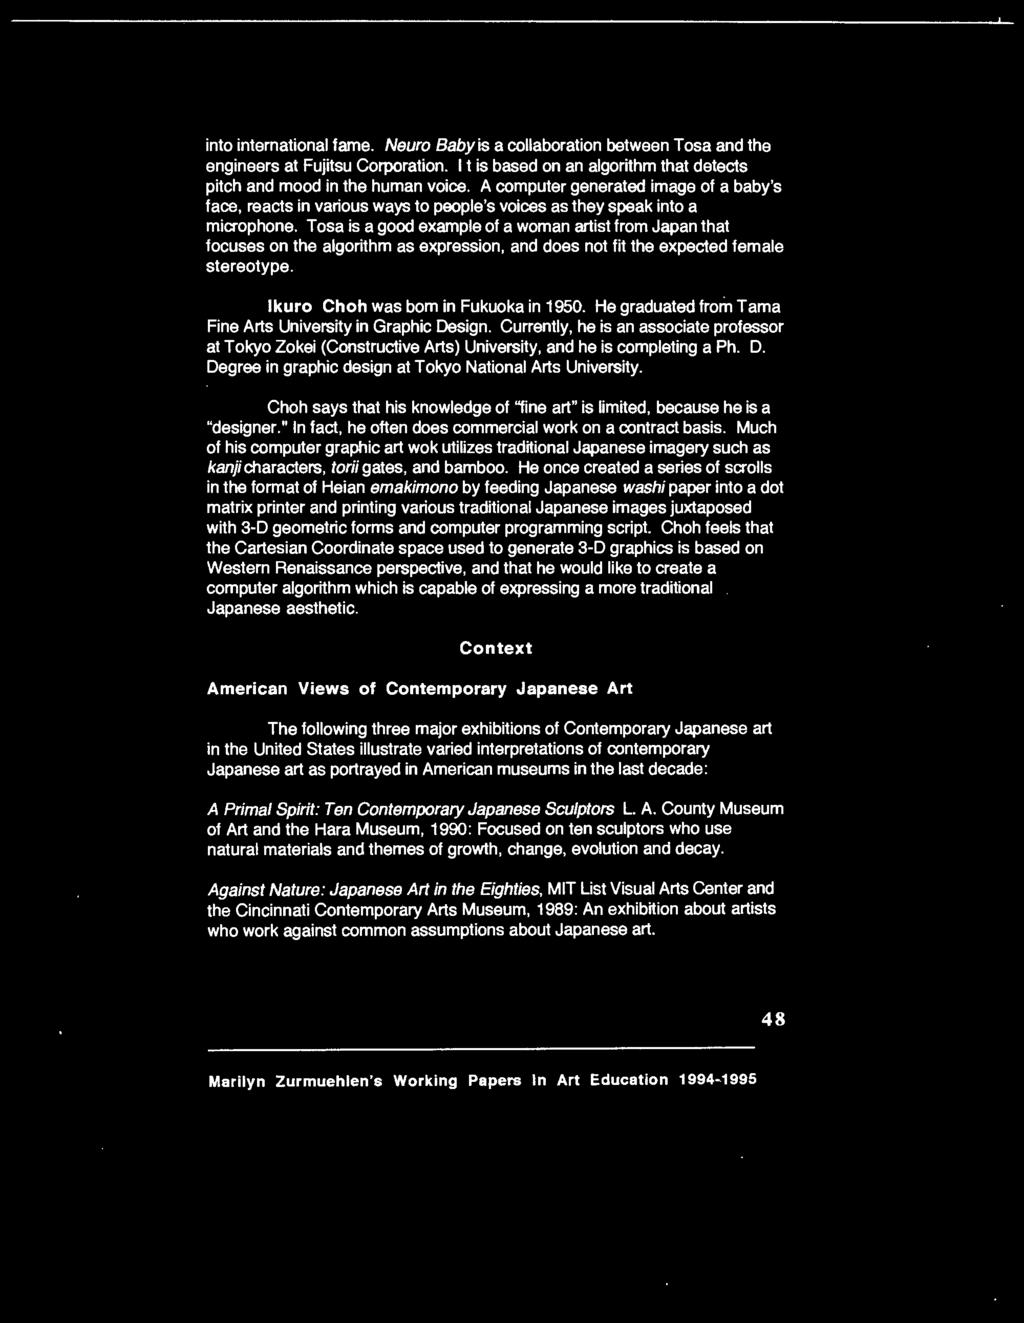 Marilyn Zurmuehlen Working Papers in Art Education, Vol. 13 [1995], Art. 11 into international fame. Neuro Baby is a collaboration between Tosa and the engineers at Fujitsu Corporation.